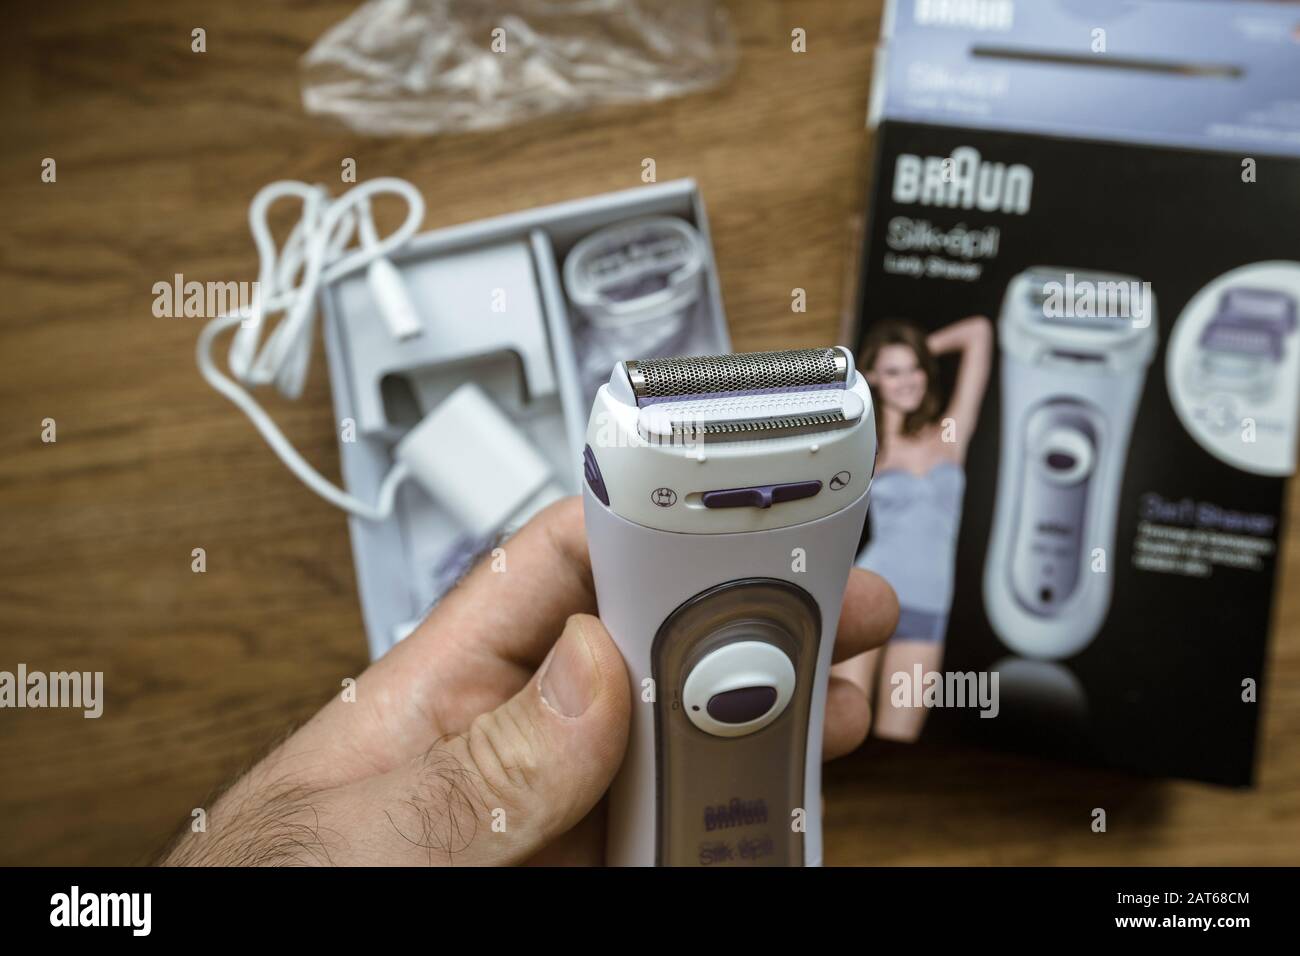 Paris, France - Sep 23, 2019: man POV hands holding female epilator Braun  Silk-Epil Lady Shaver inspecting the device after unboxing unpacking Stock  Photo - Alamy